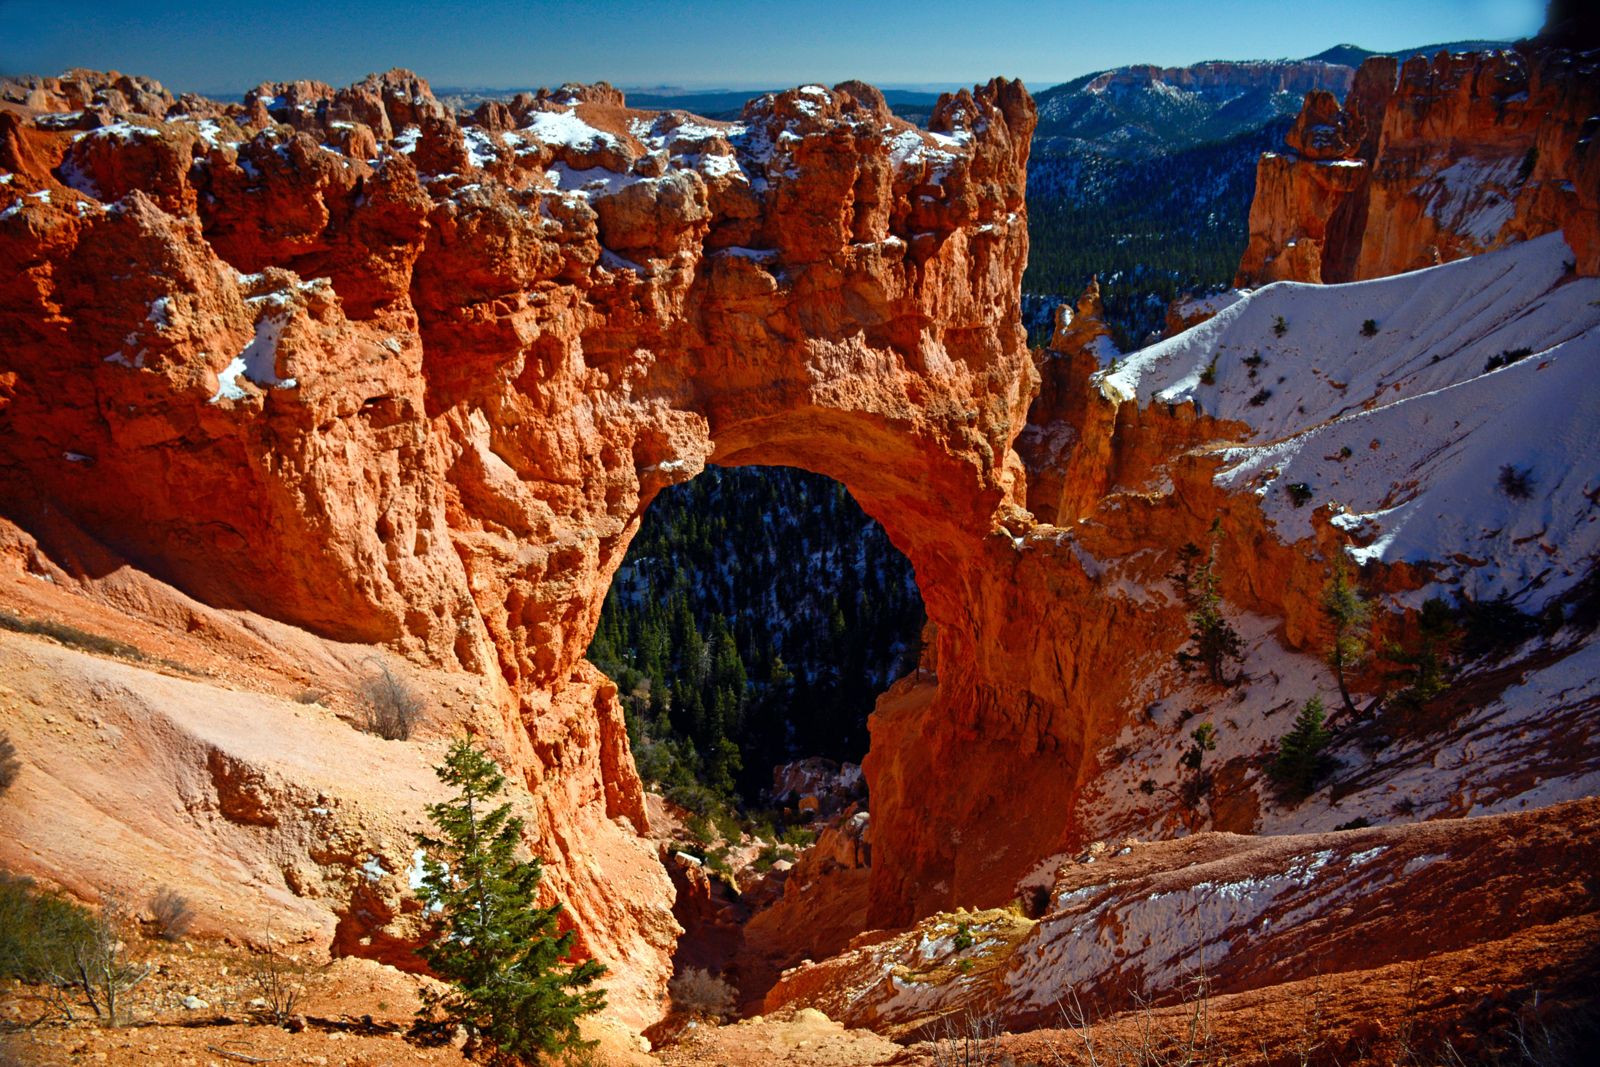 An image of a natural bridge rock formation in Bryce Canyon National Park - best hikes in Bryce Canyon